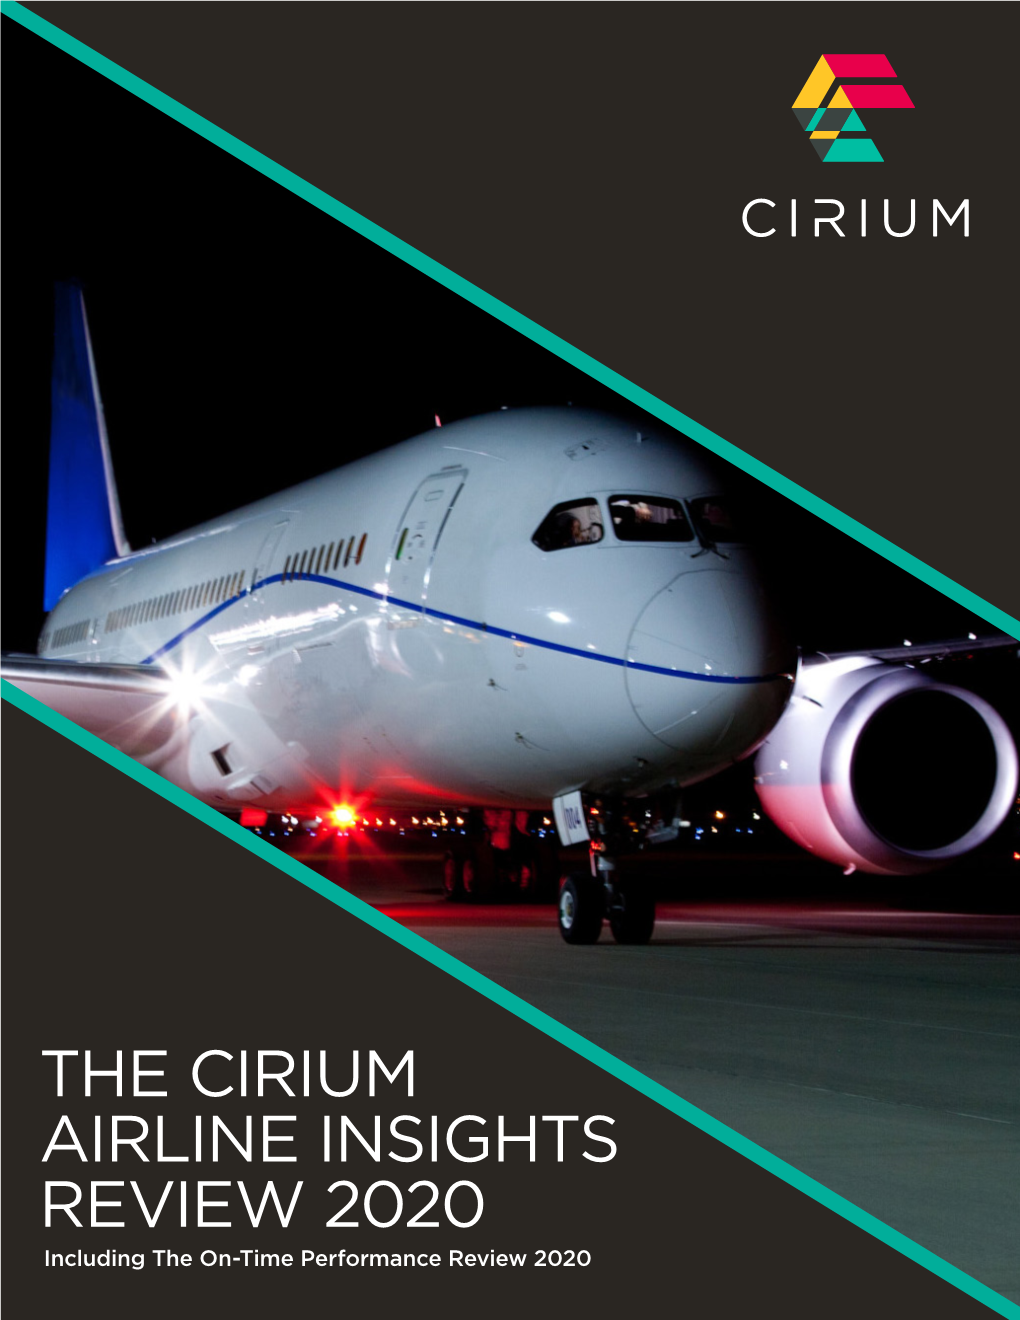 THE CIRIUM AIRLINE INSIGHTS REVIEW 2020 Including the On-Time Performance Review 2020 2020 in SUMMARY